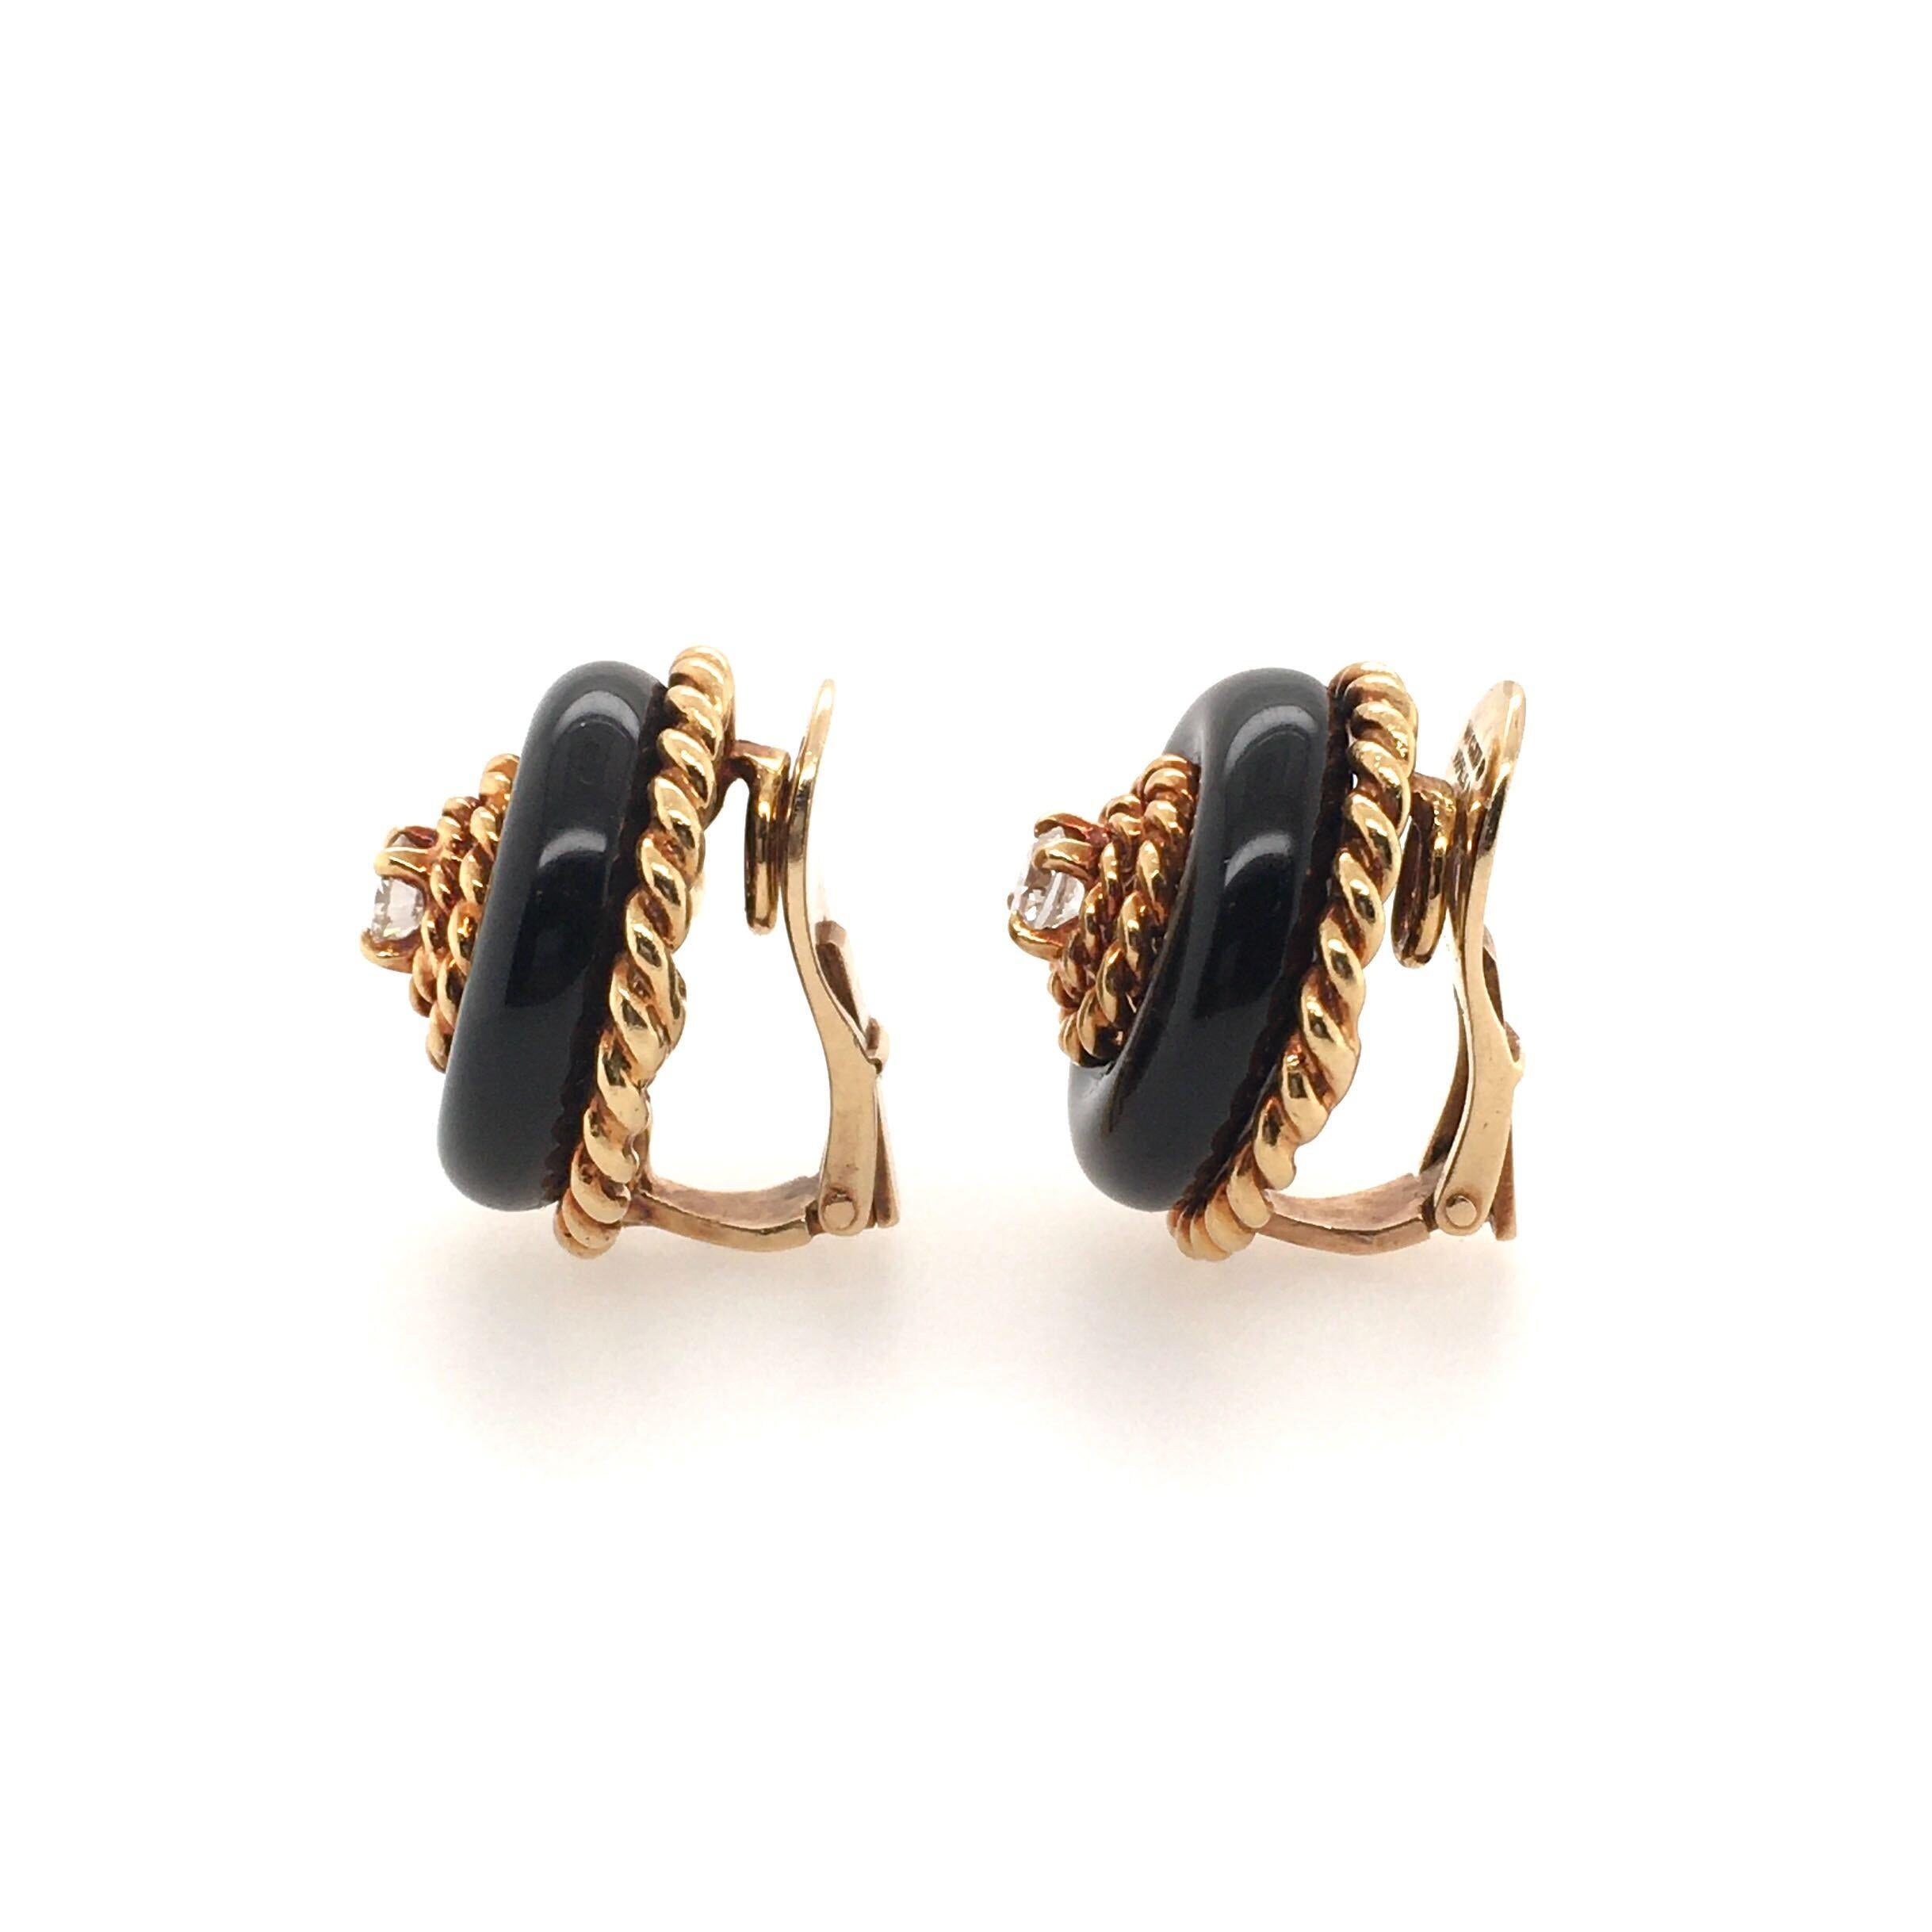 A pair of 18 karat yellow gold, black onyx and diamond earrings. Van Cleef and Arpels. Circa 1960. Of dome design, set with black onyx, enhanced by gold ropework, centering a circular cut diamond, each weighing approximately 0.20 carats. Diameter is